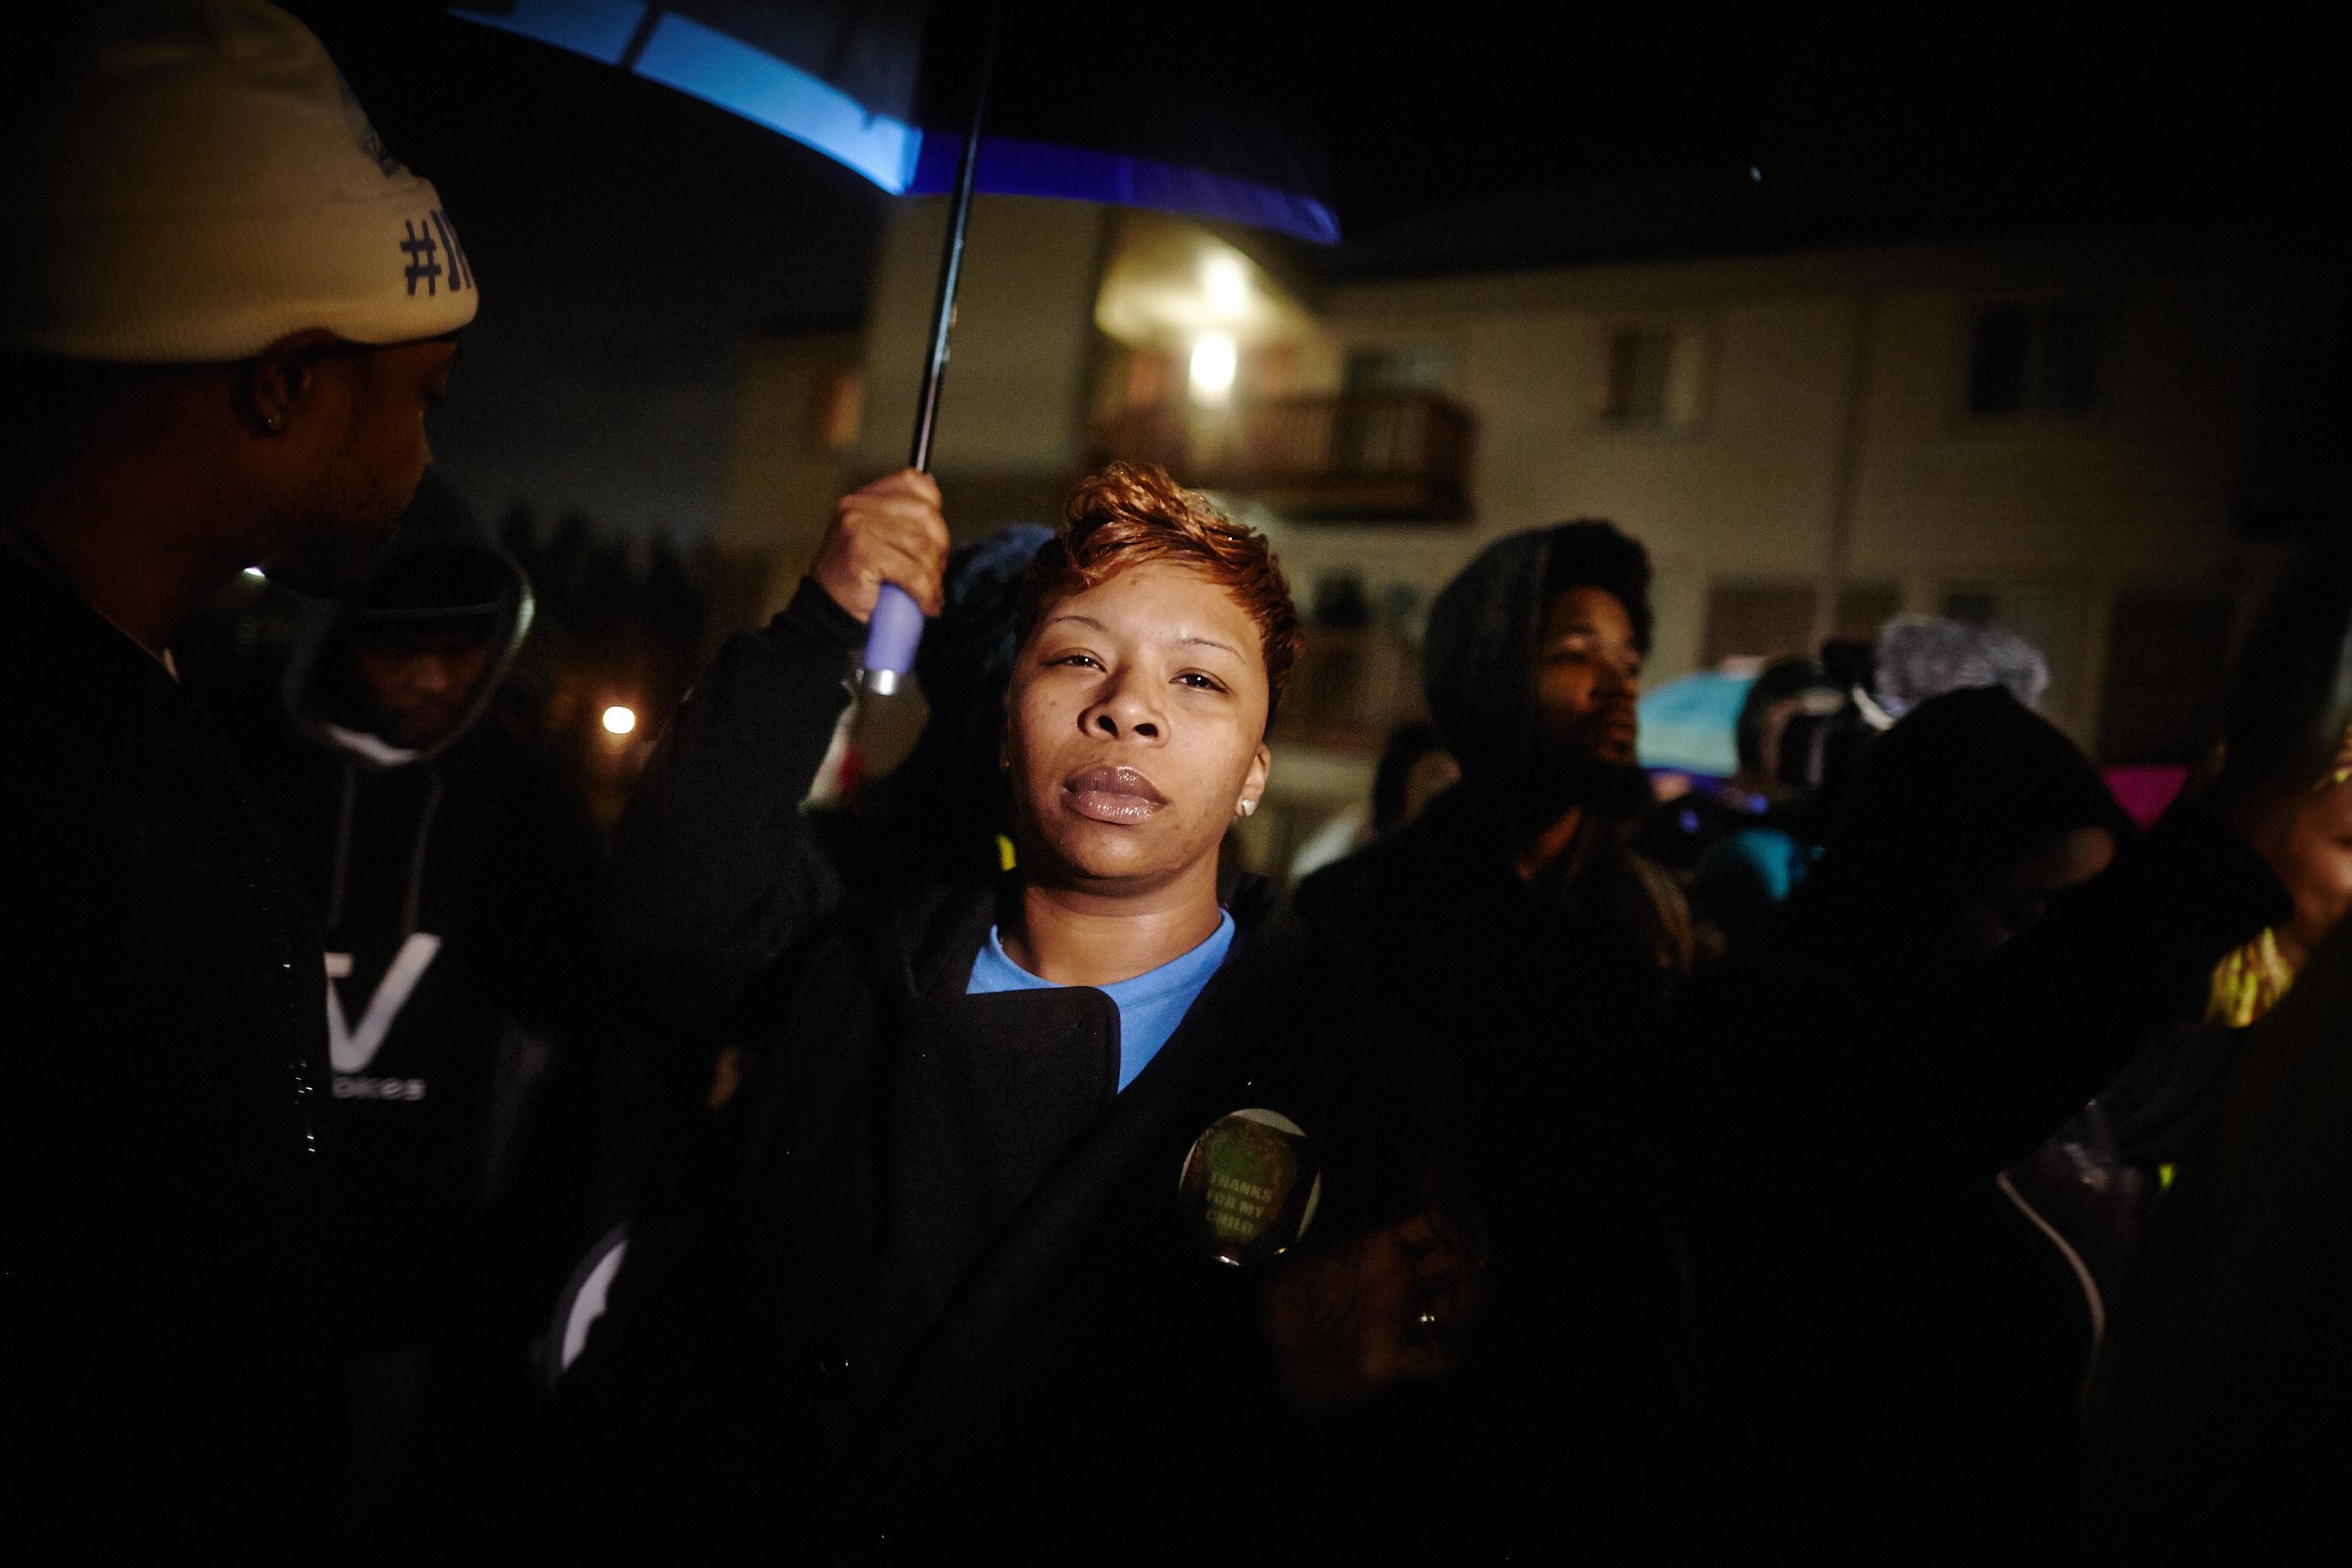 Lesley McSpadden, the mother of slain Ferguson teen Michael Brown talks to a crowd of protesters in advance of the Grand Jury verdict on police officer Darren Wilson on Nov. 22, 2014.